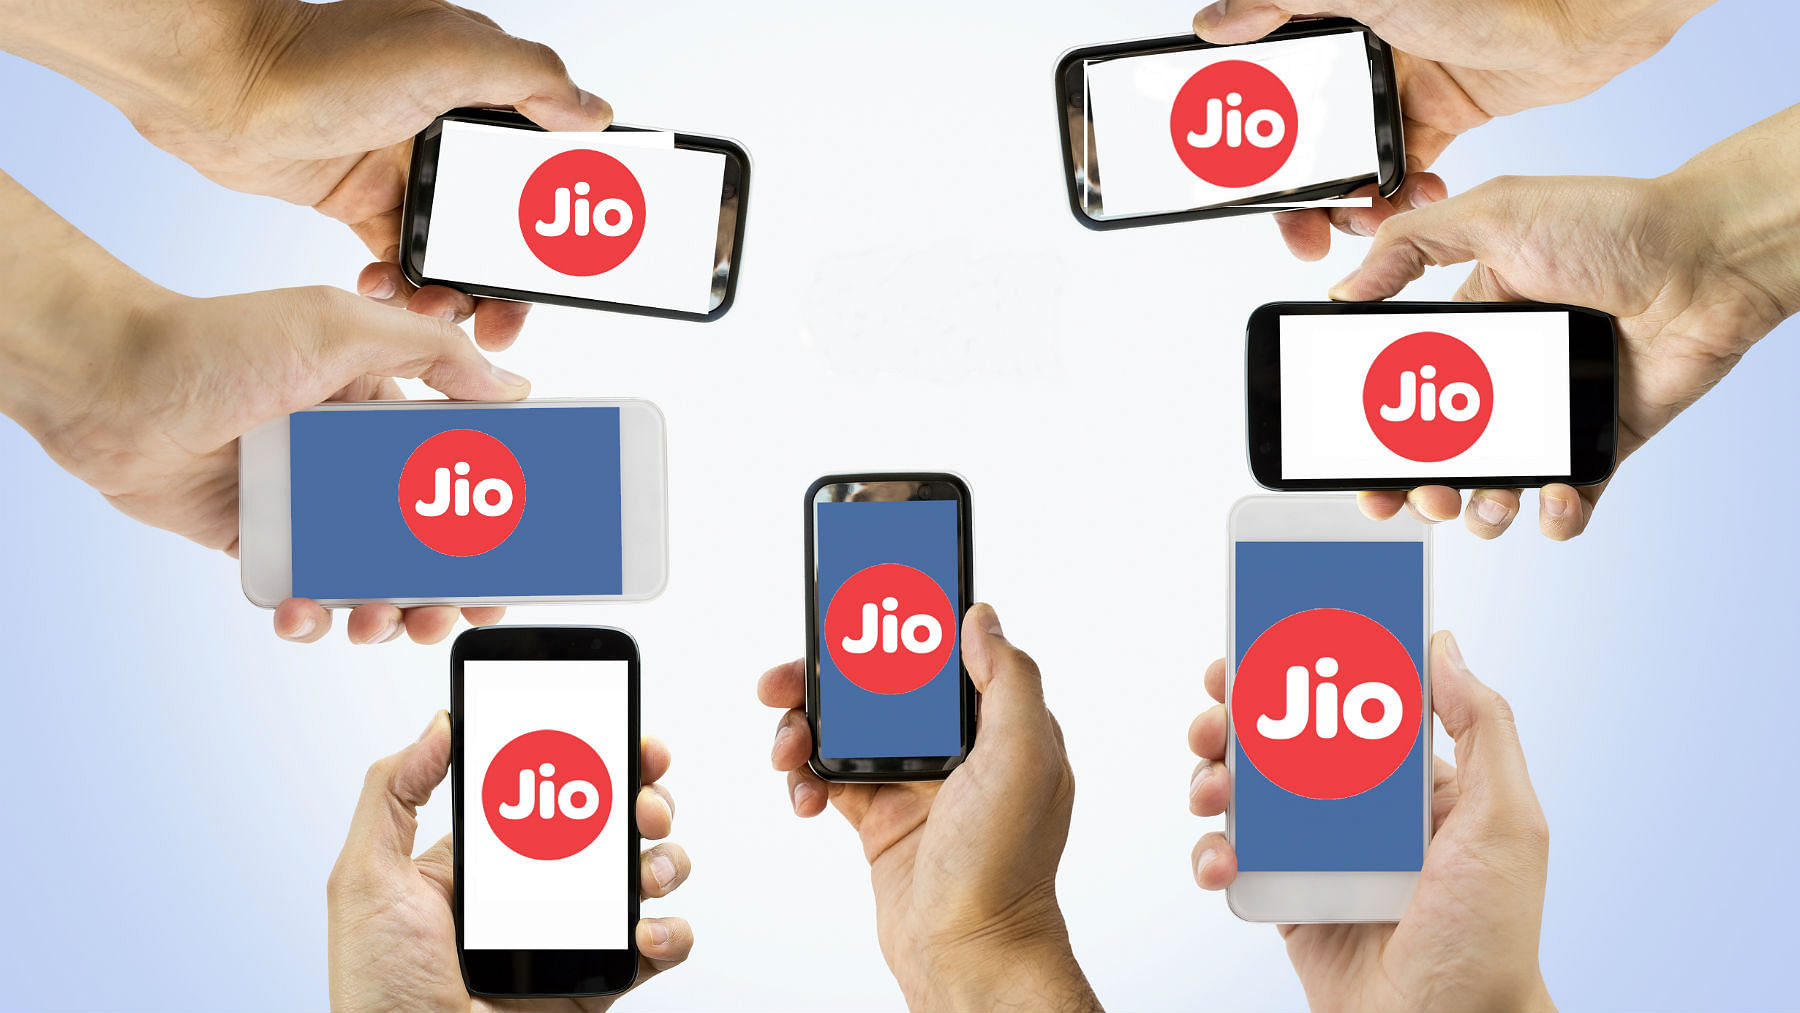 Everyone wants a Jio 4G SIM with free data and voice calls. (Photo: <b>The Quint</b>)